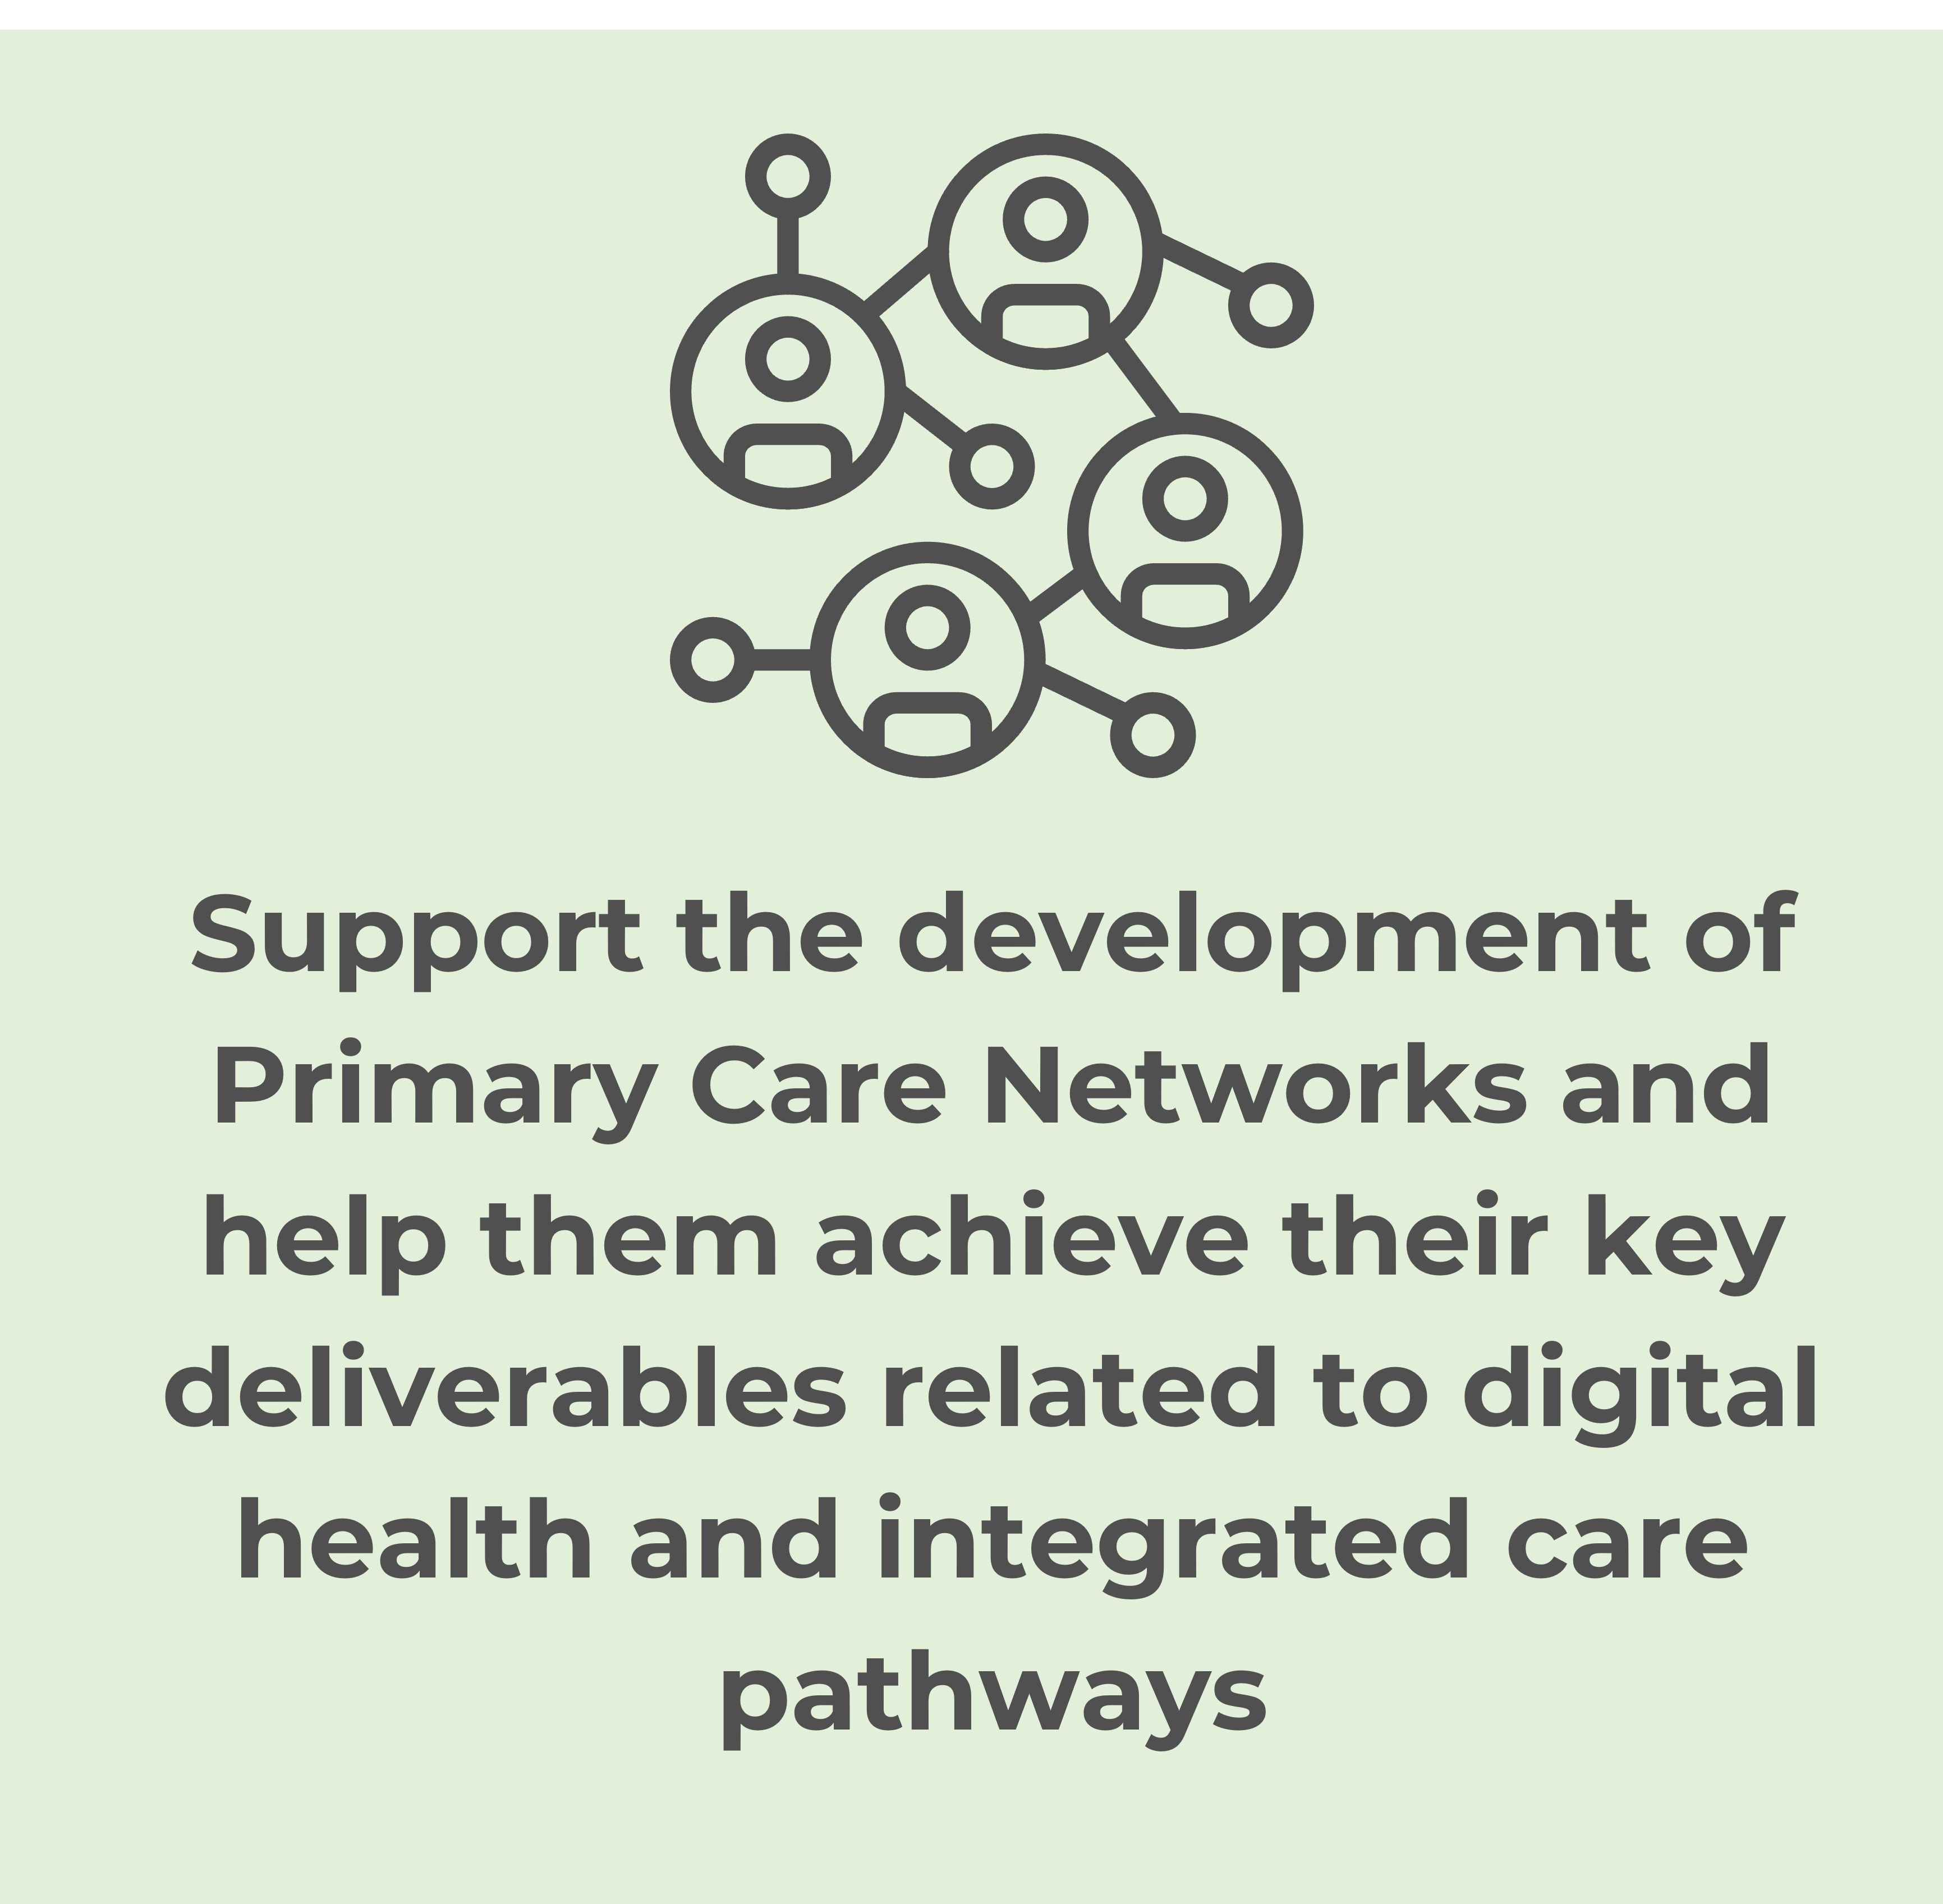 Support the development of Primary Care Networks and help them achieve their key deliverables related to digital health and integrated care pathways